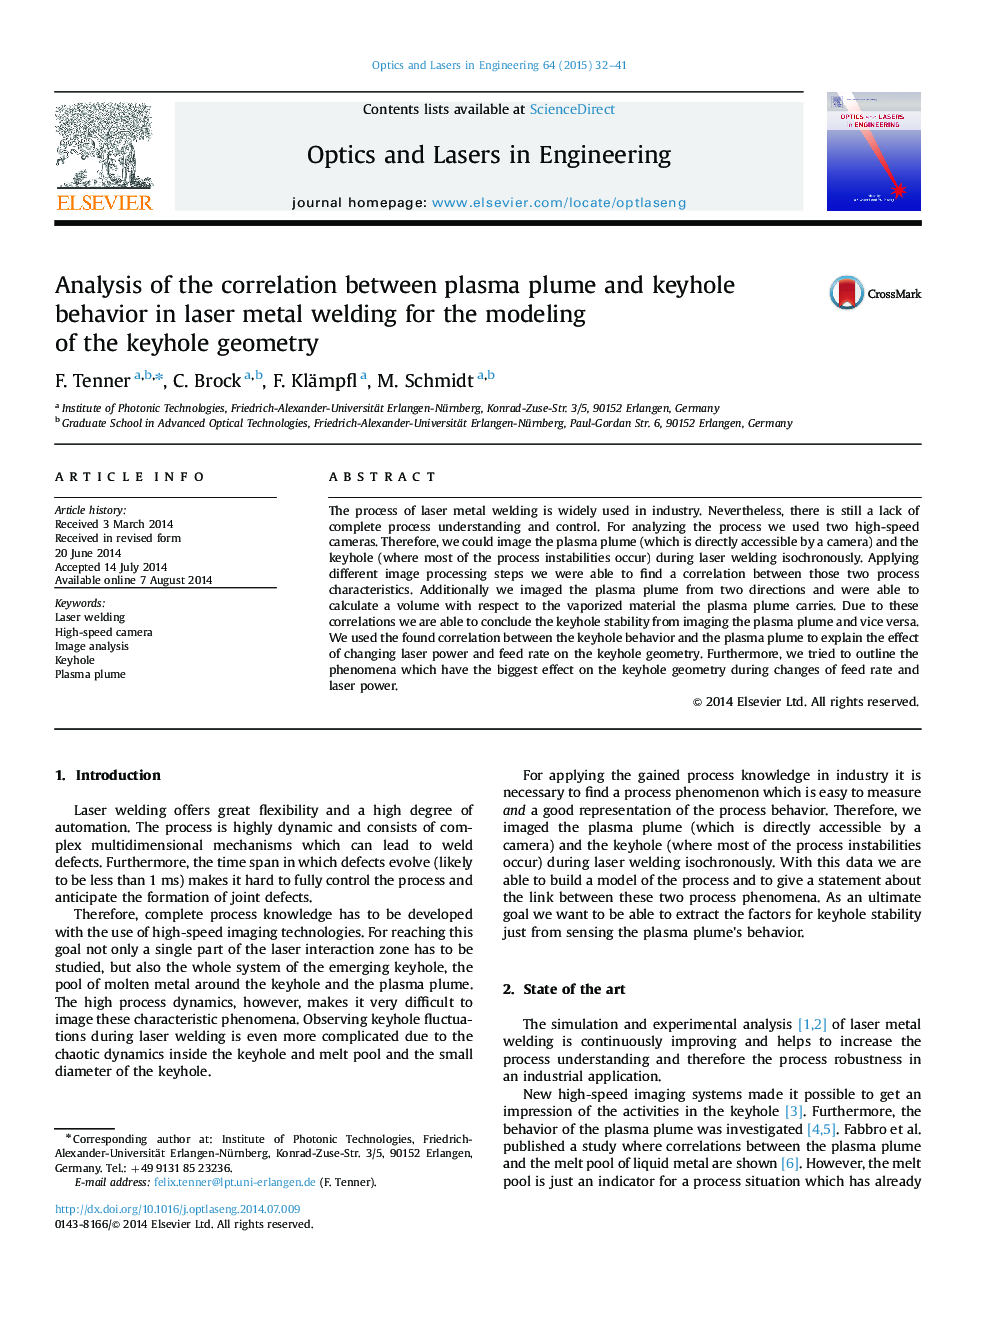 Analysis of the correlation between plasma plume and keyhole behavior in laser metal welding for the modeling of the keyhole geometry